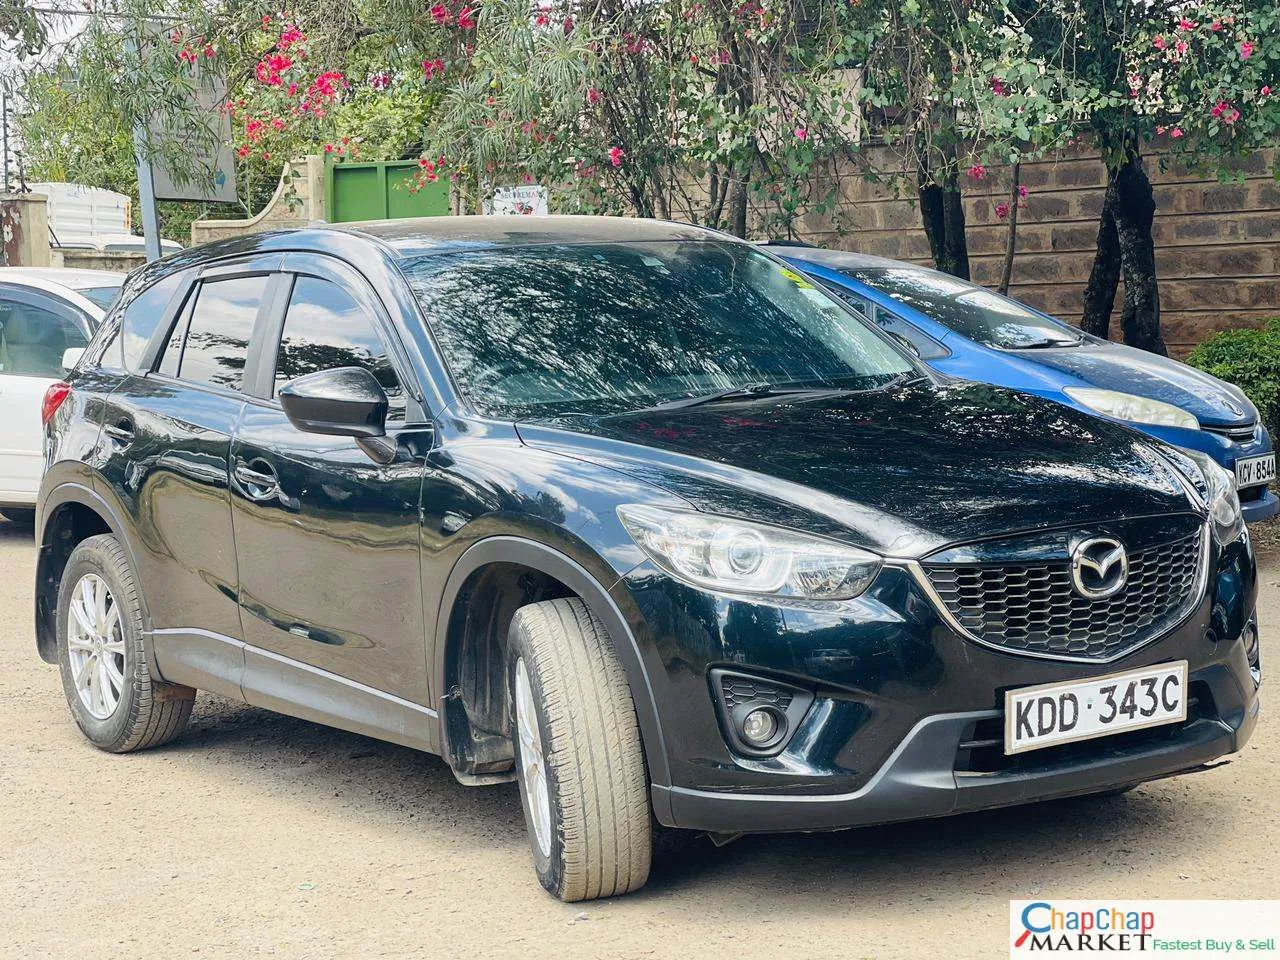 Mazda CX5 for sale in kenya hire purchase installments You Pay 30% DEPOSIT TRADE IN OK EXCLUSIVE Mazda cx5 Kenya petrol 🔥